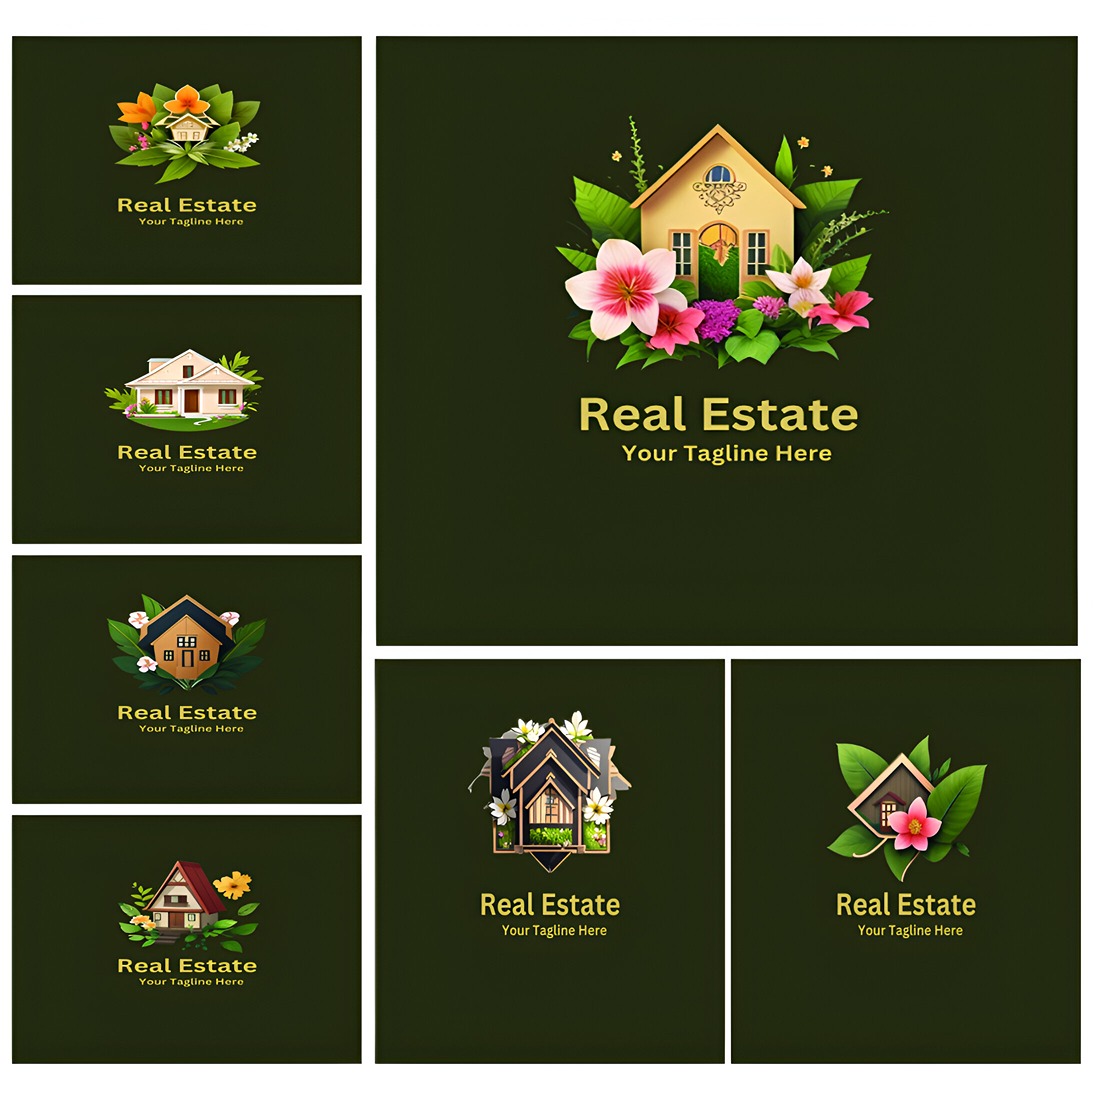 Real Estate - Luxury Logo Design Template cover image.